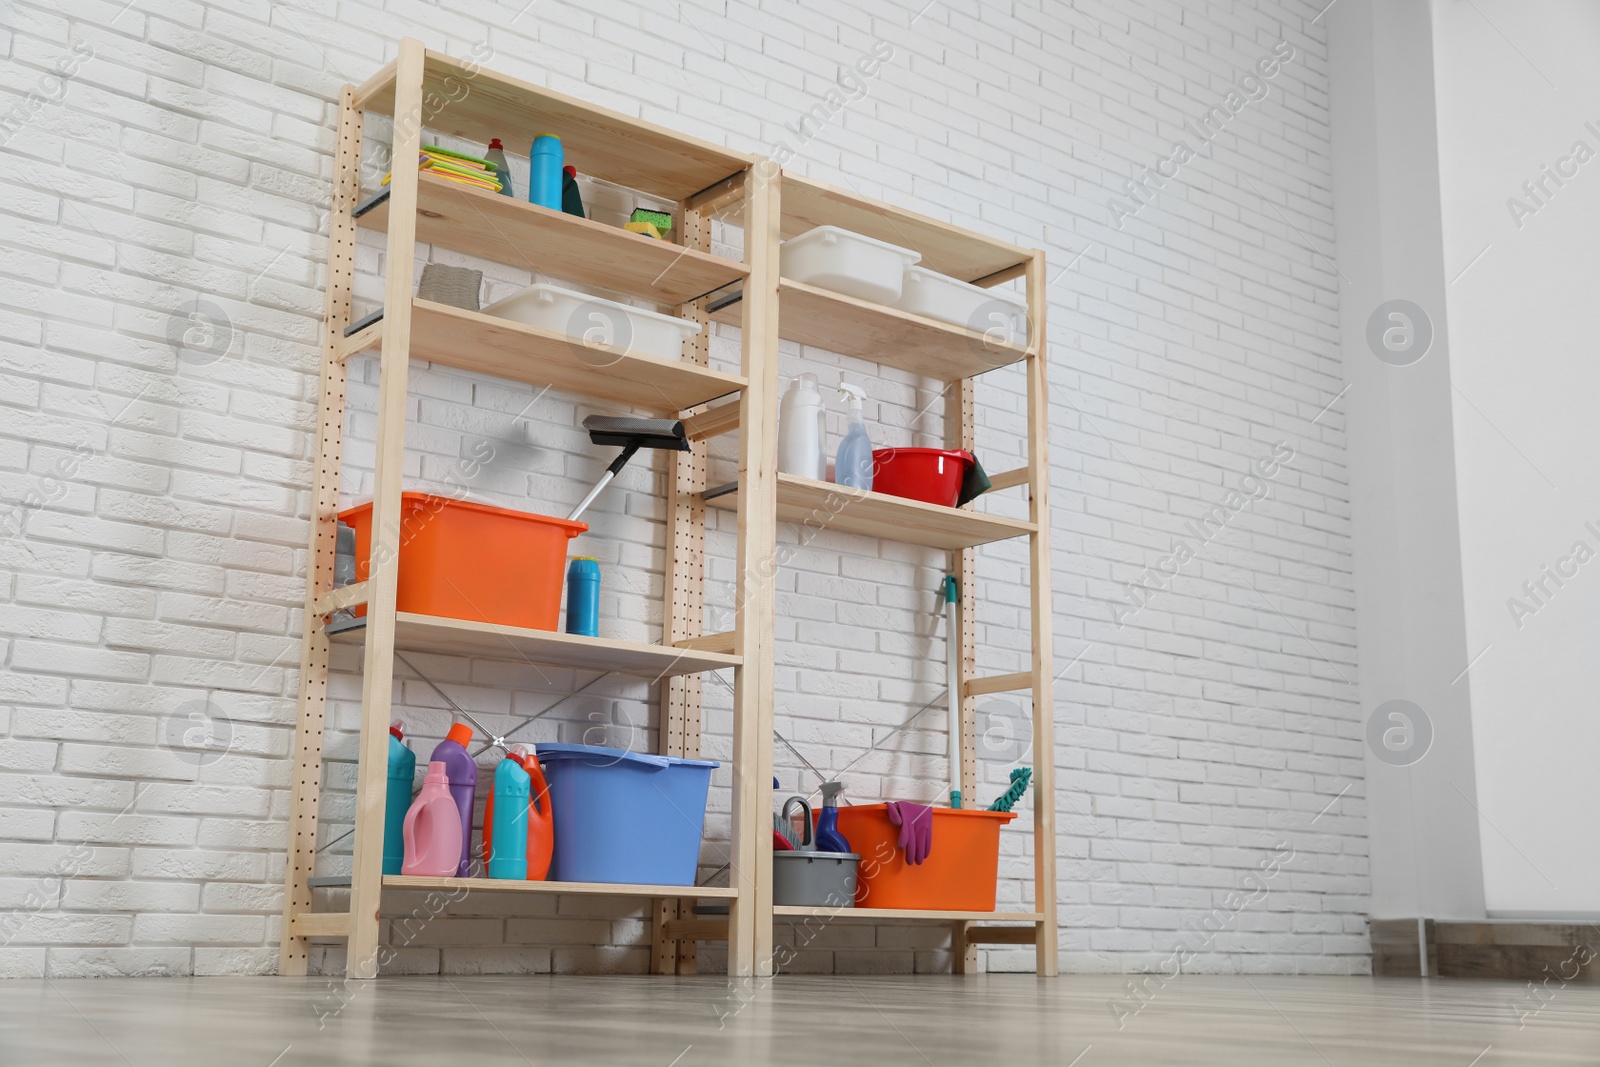 Photo of Wooden shelving units with cleaning equipment near white brick wall. Stylish room interior